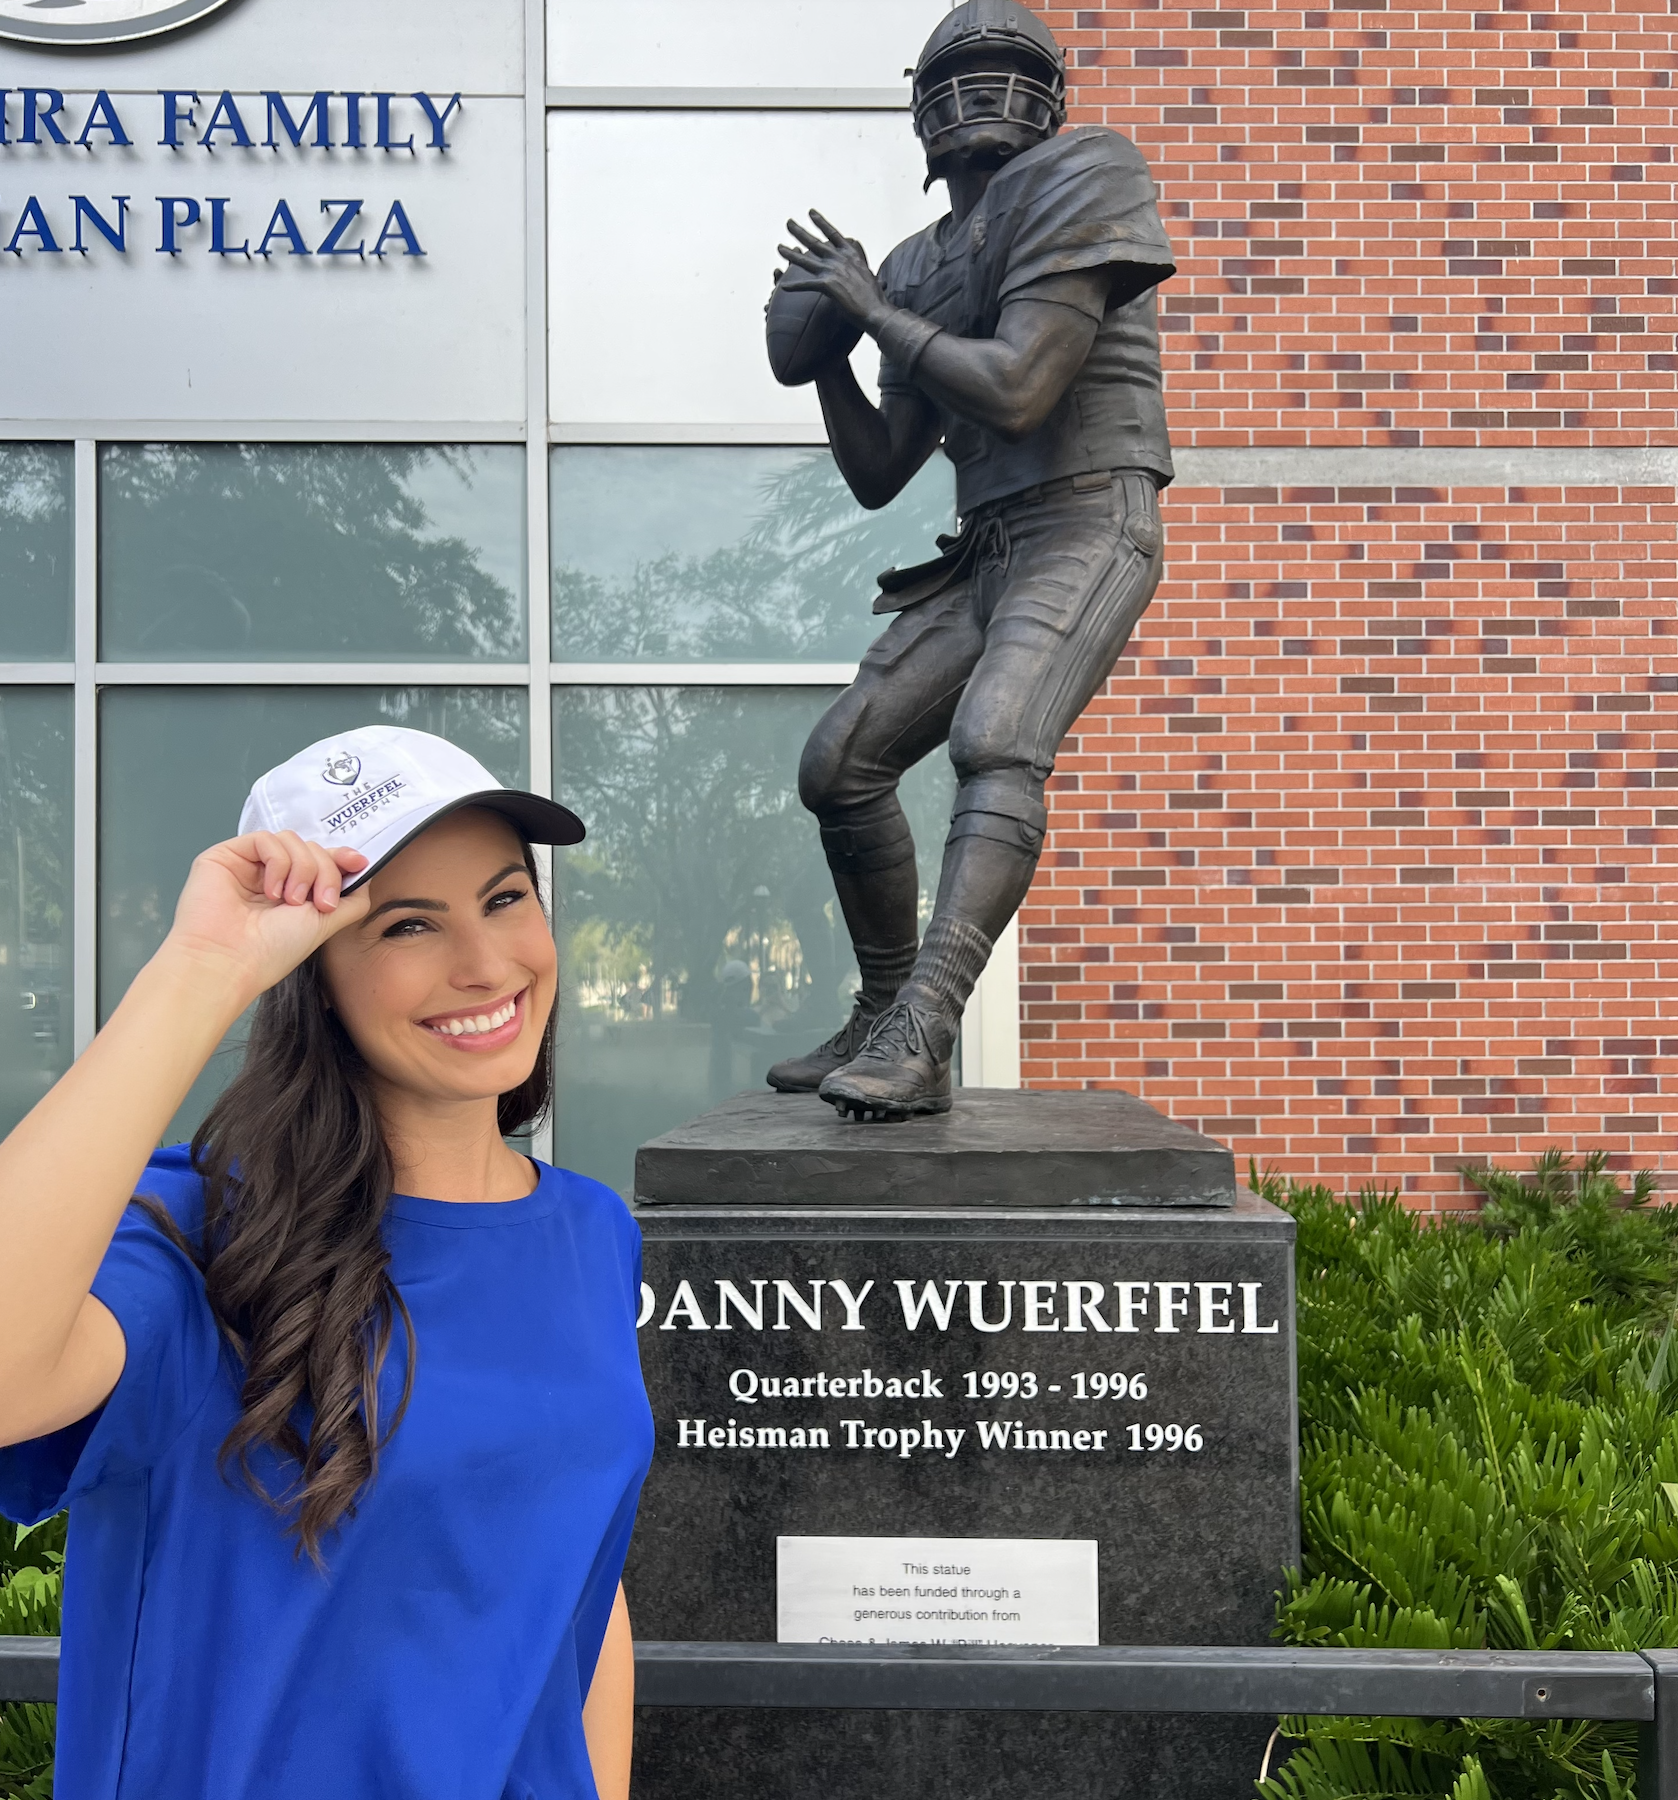 Welcome to the Wuerffel Foundation!